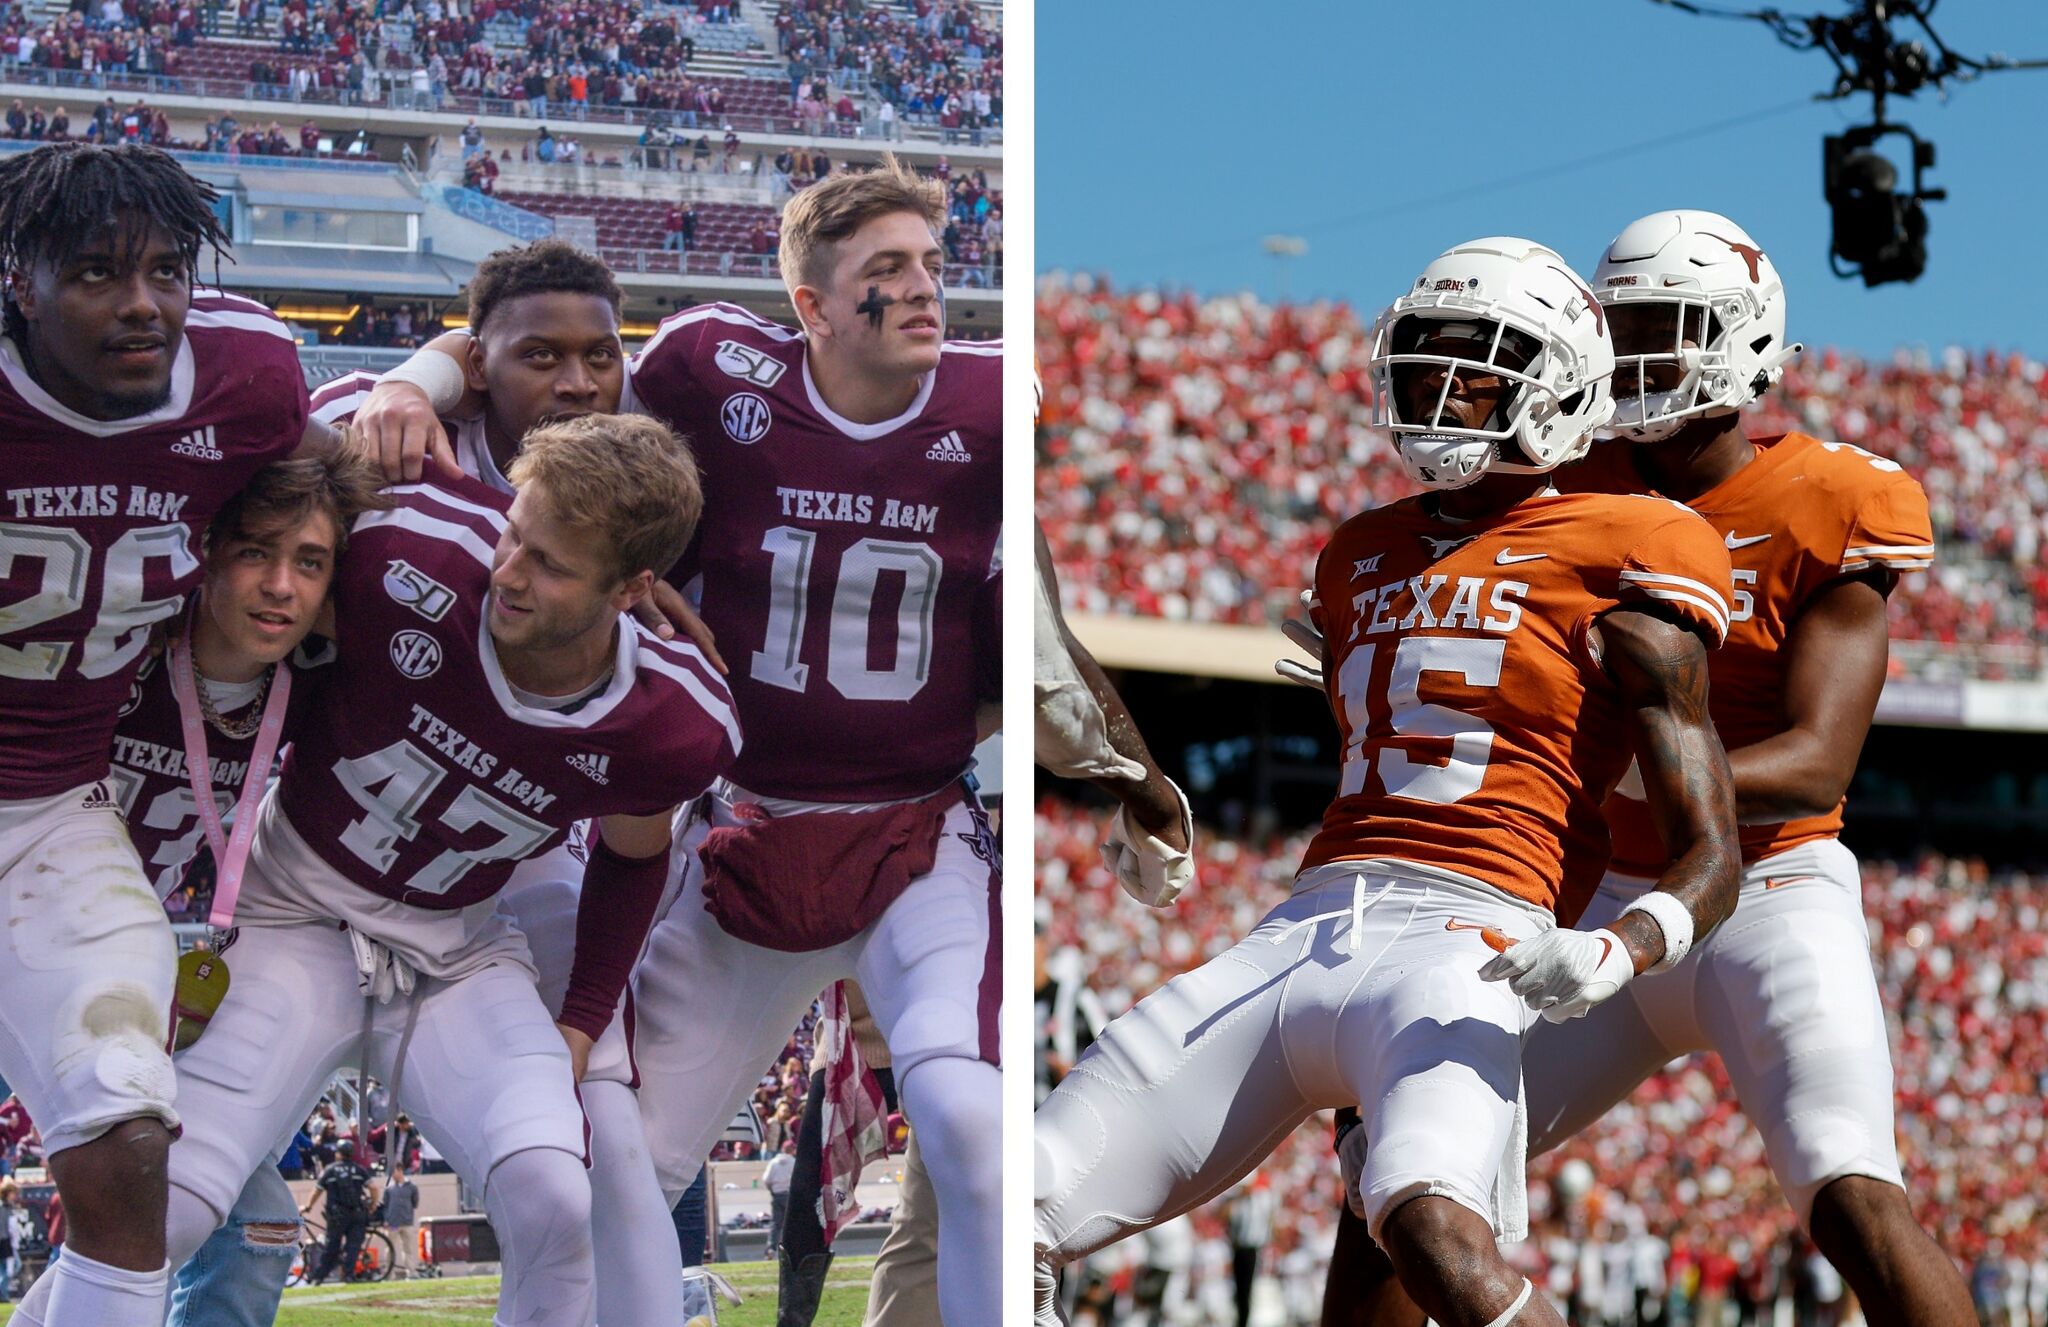 sec-has-a-scheduling-problem-with-aggies-longhorns-sooners